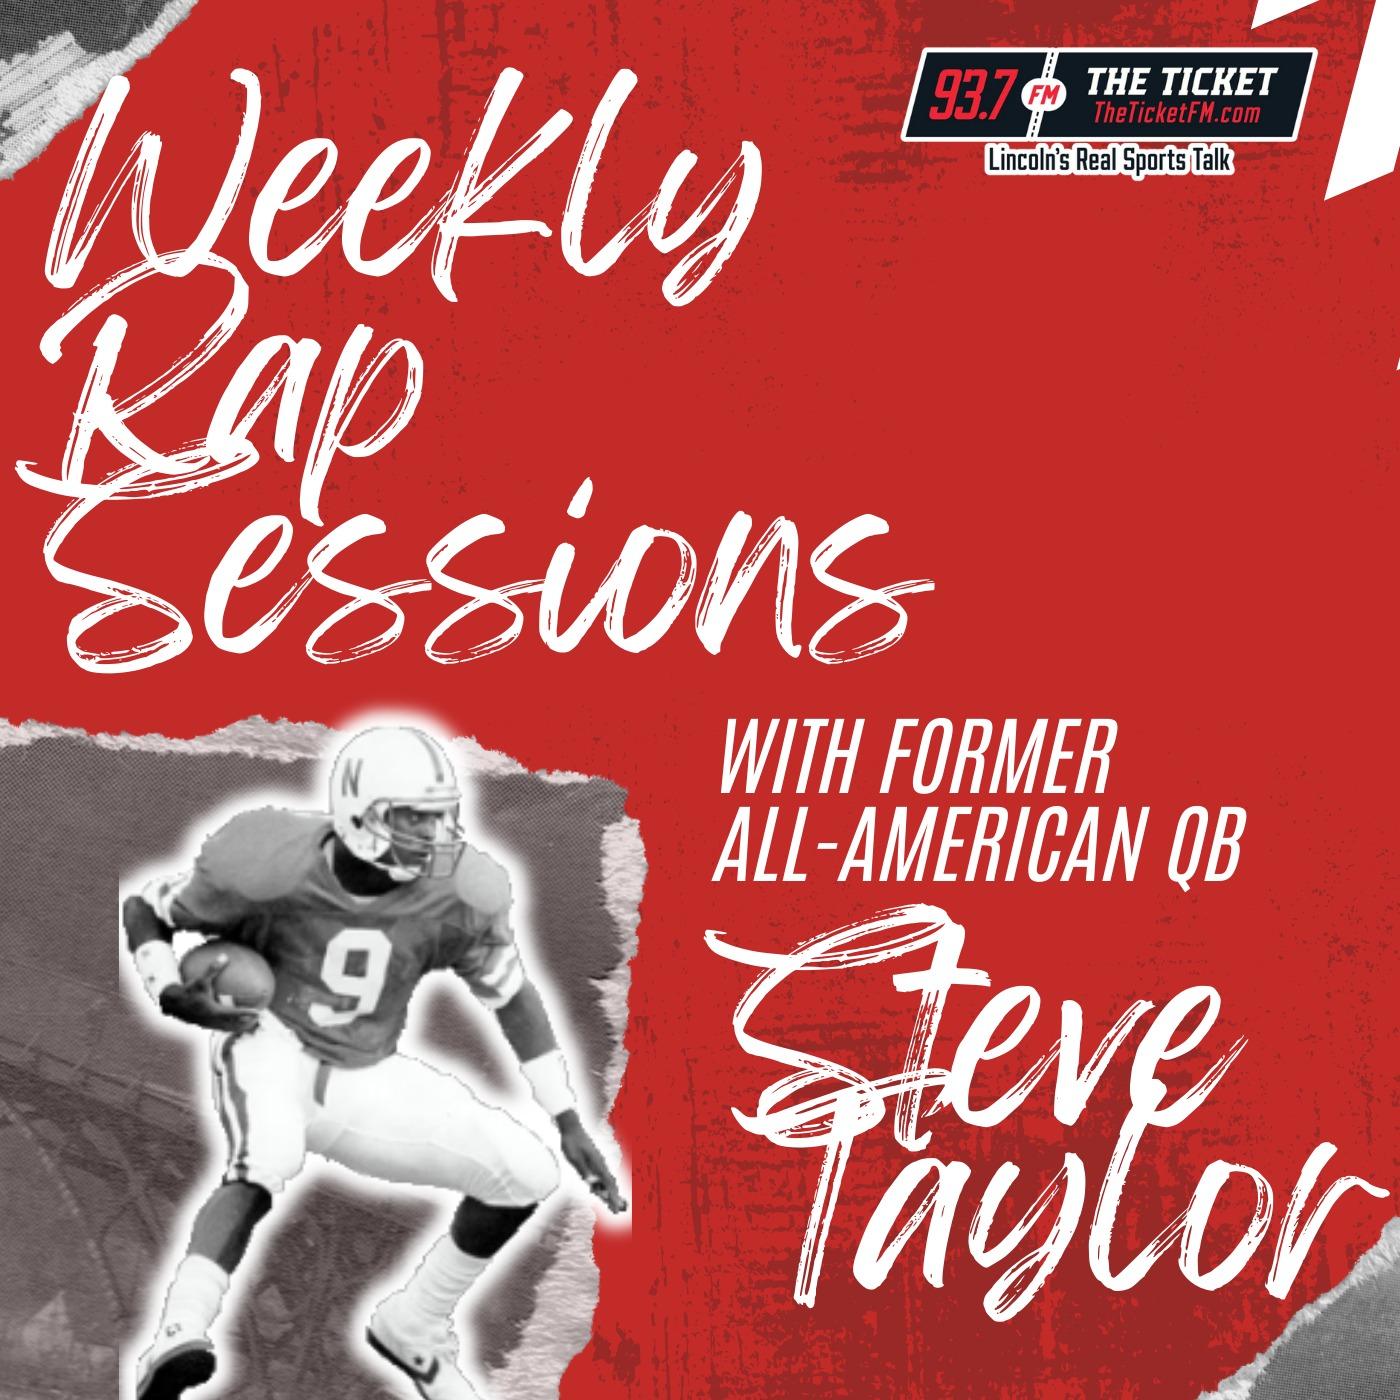 Weekly Rap Session w/ All-American Quarterback Steve Taylor - 93.7 The Ticket KNTK